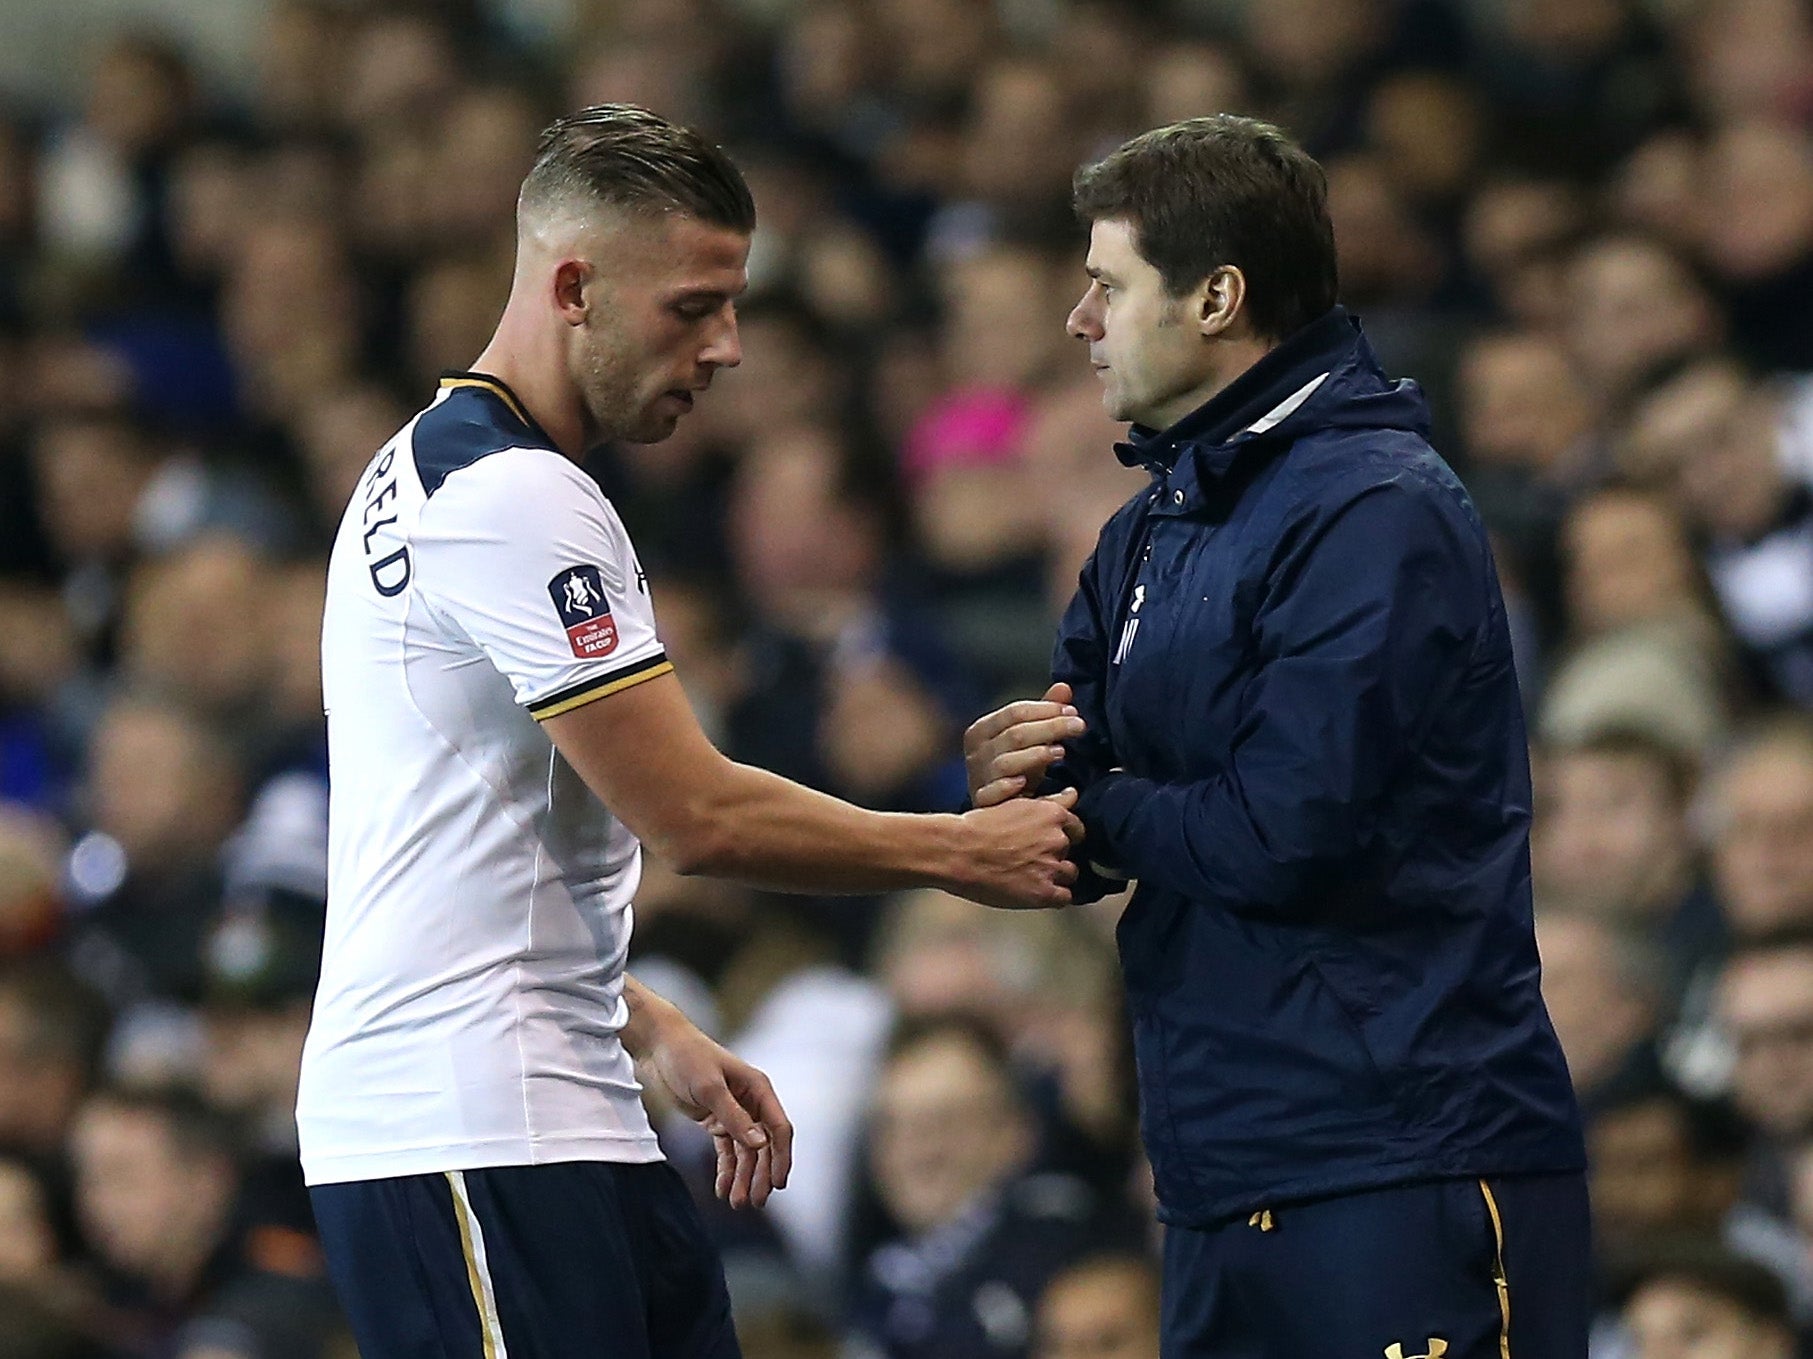 Alderweireld was unfortunate to miss out on the PFA Team of the Year